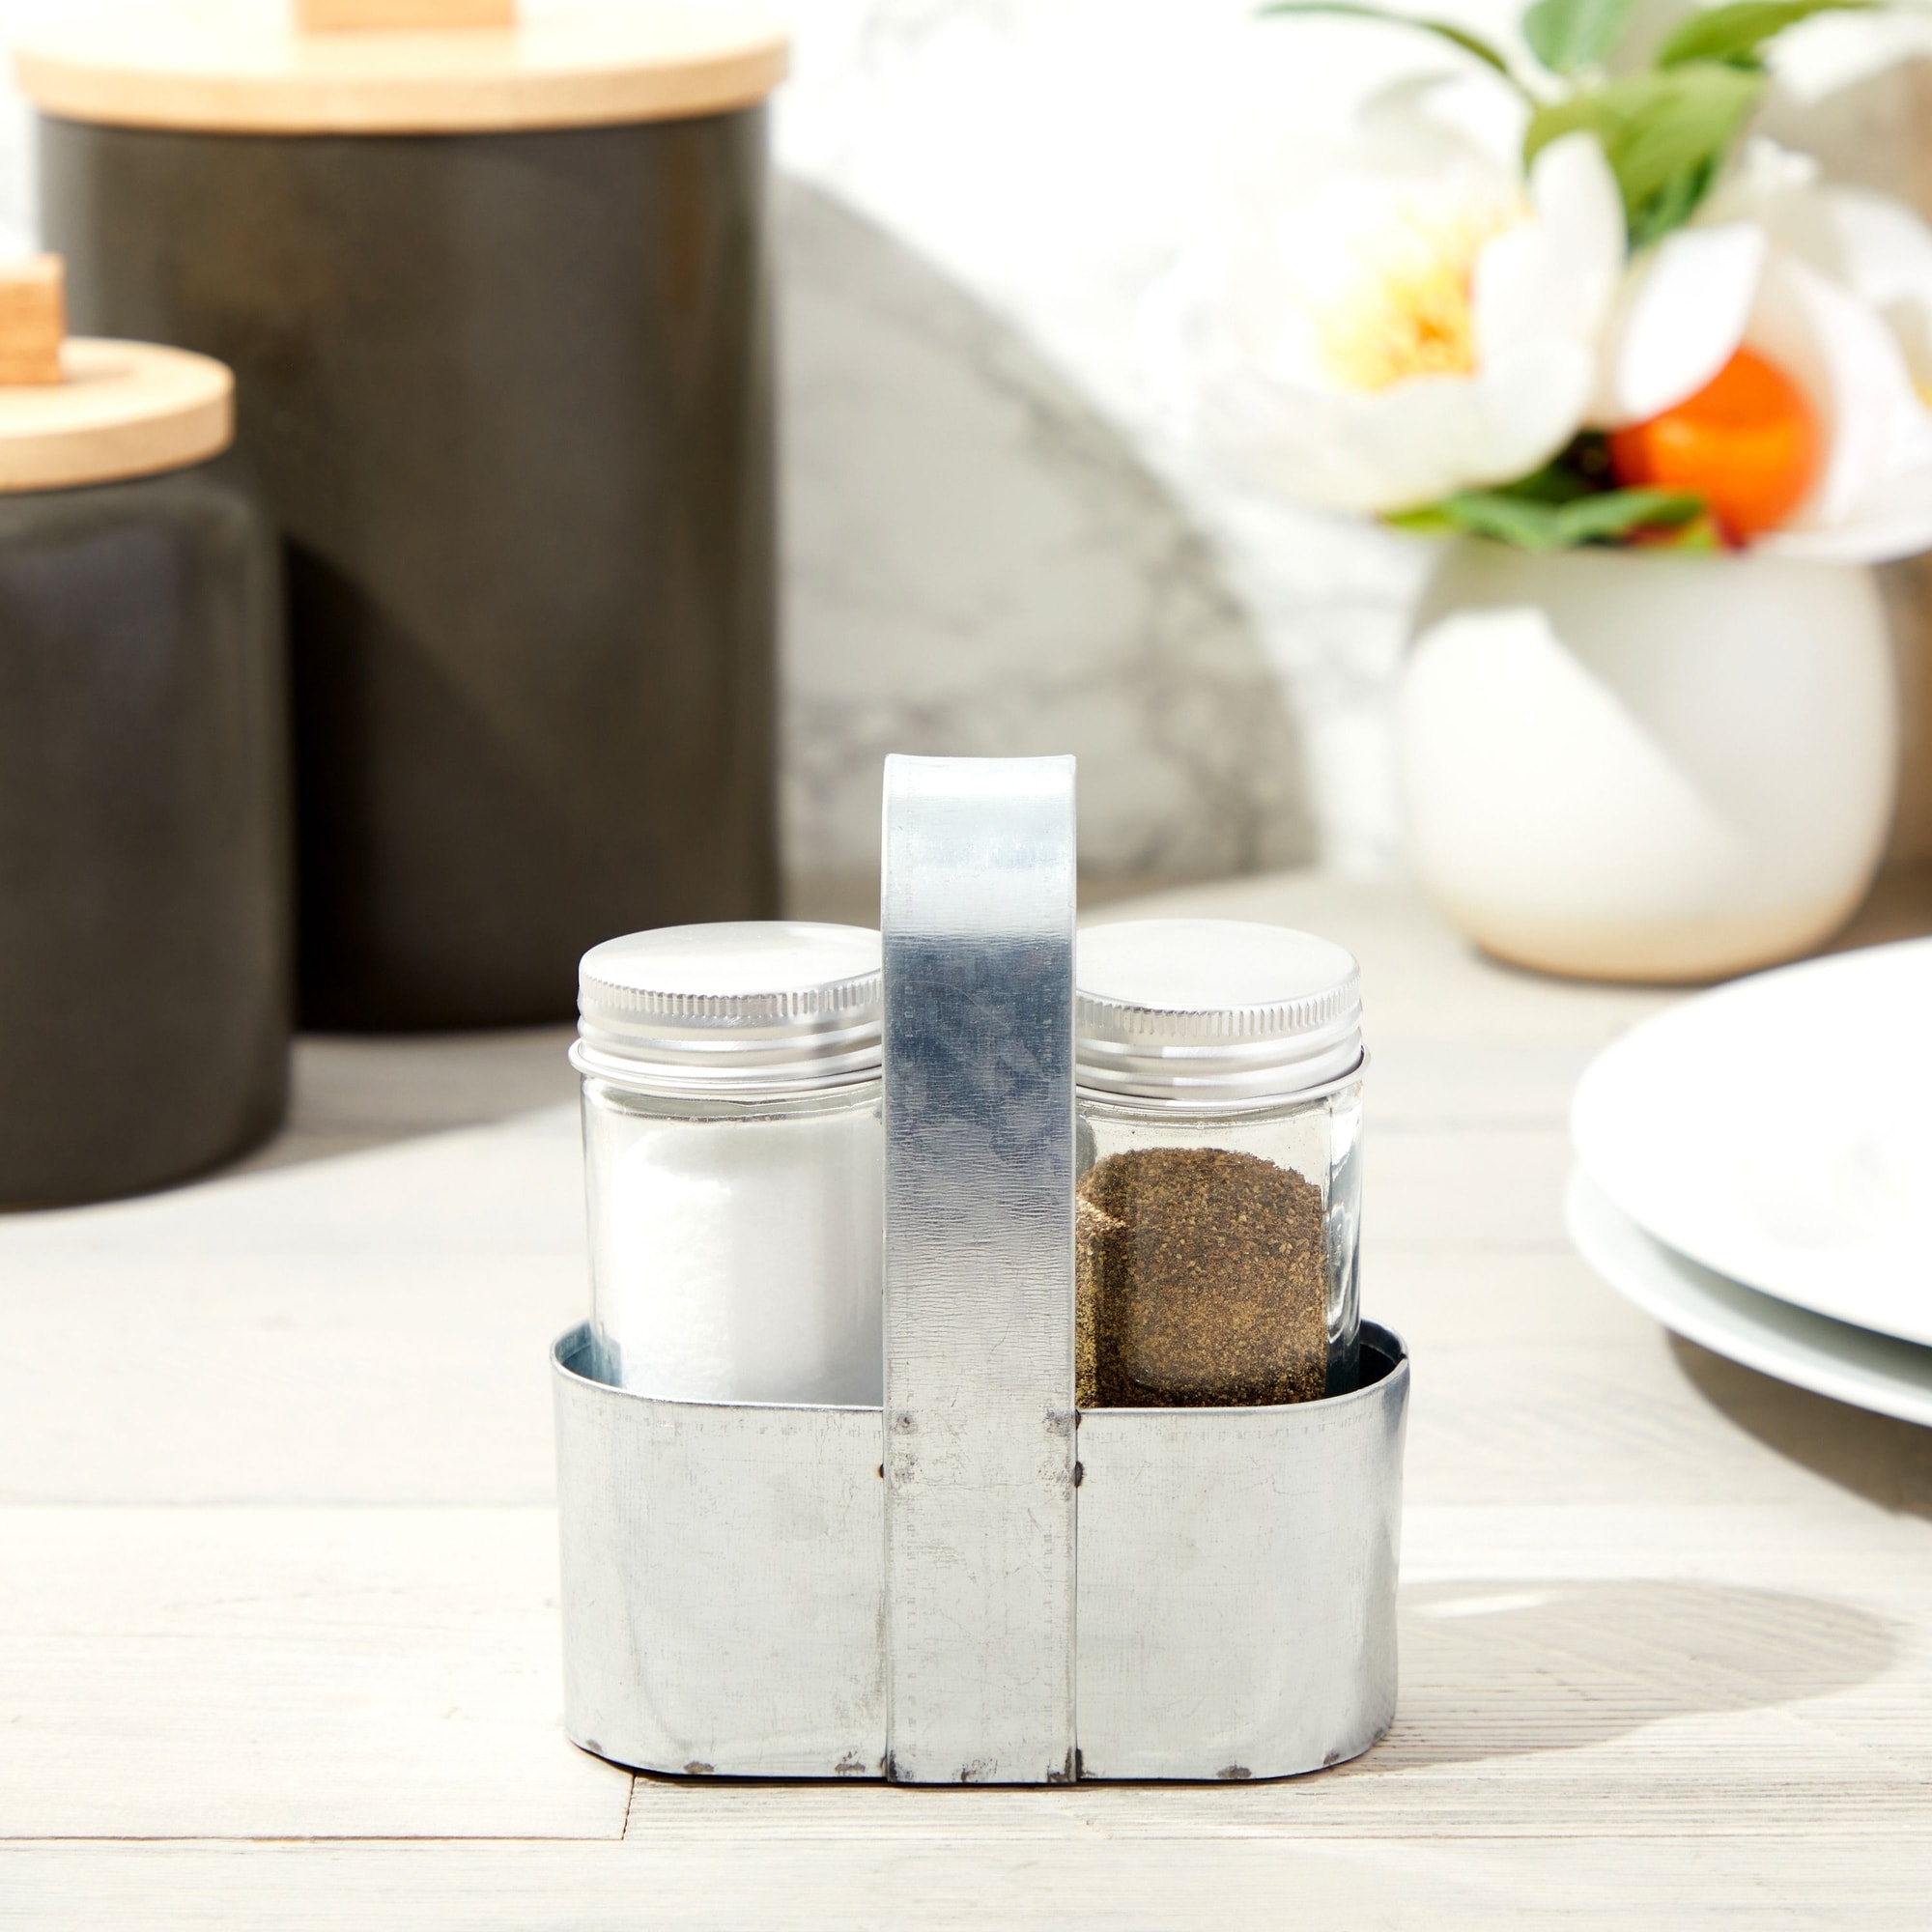 https://ak1.ostkcdn.com/images/products/is/images/direct/0097464e34b7a870998331e4528b7032e22fd59e/Rustic%C2%A0Farmhouse-Salt-and-Pepper-Shakers%C2%A0with-Caddy-%283-Piece-Set%29.jpg